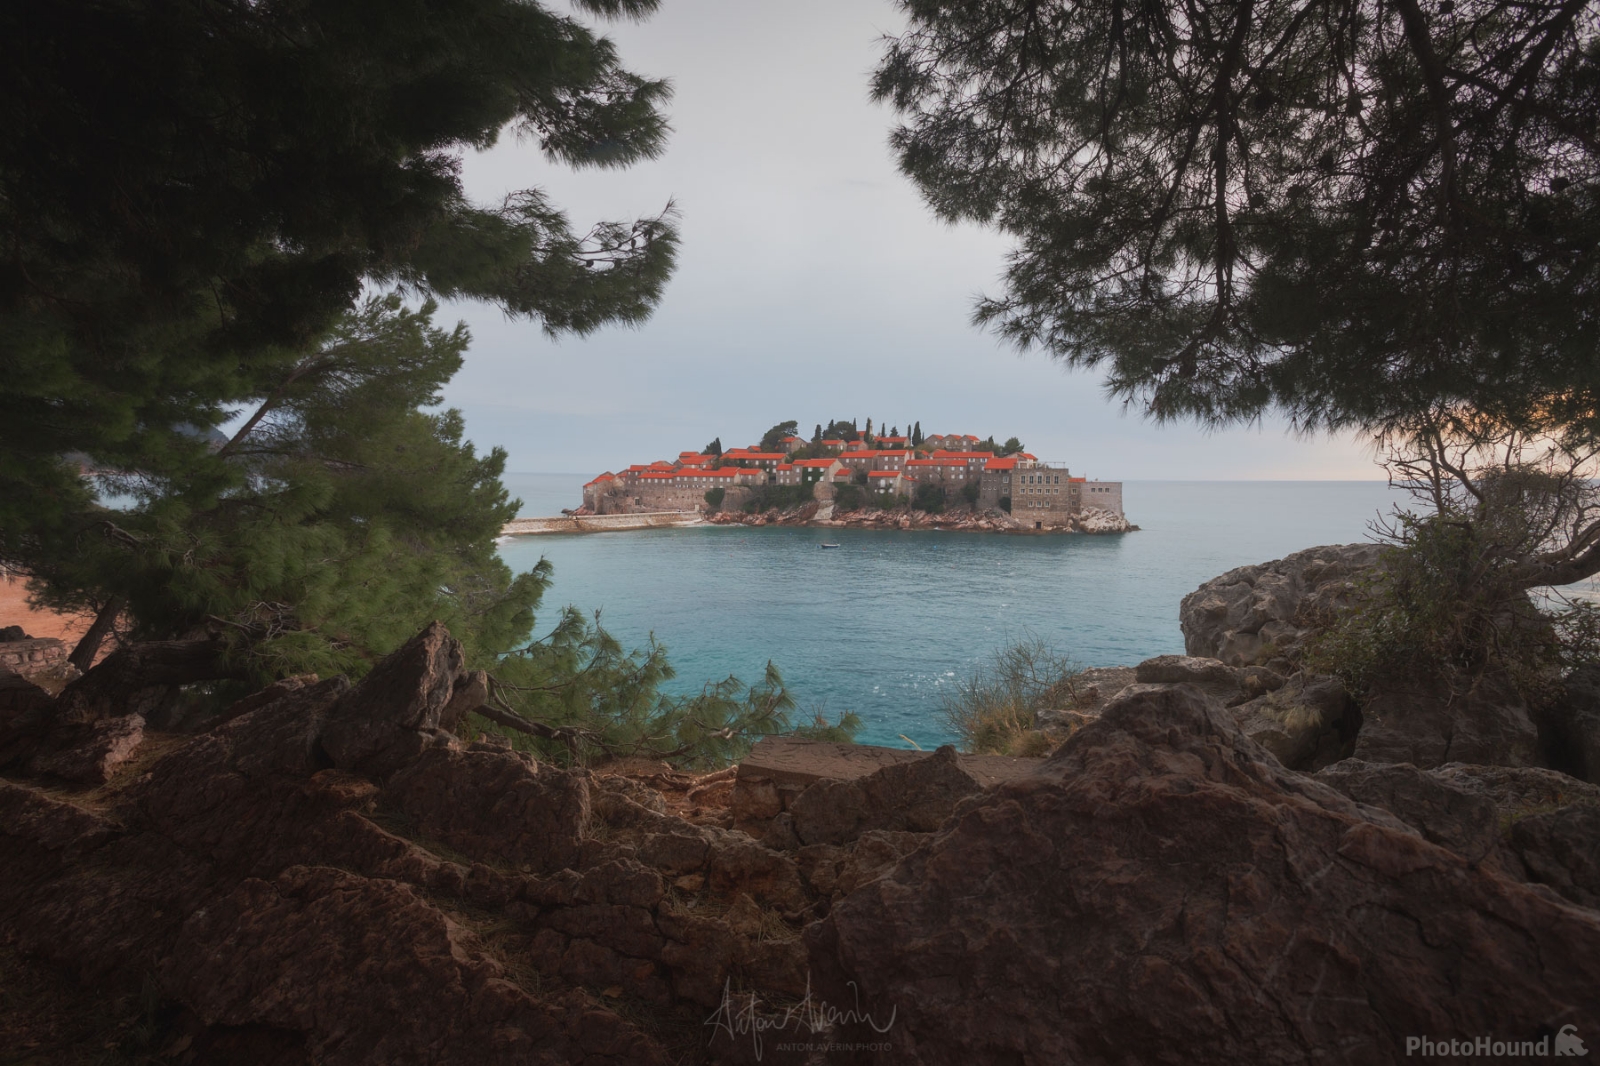 Image of Sveti Stefan close view by Anton Averin